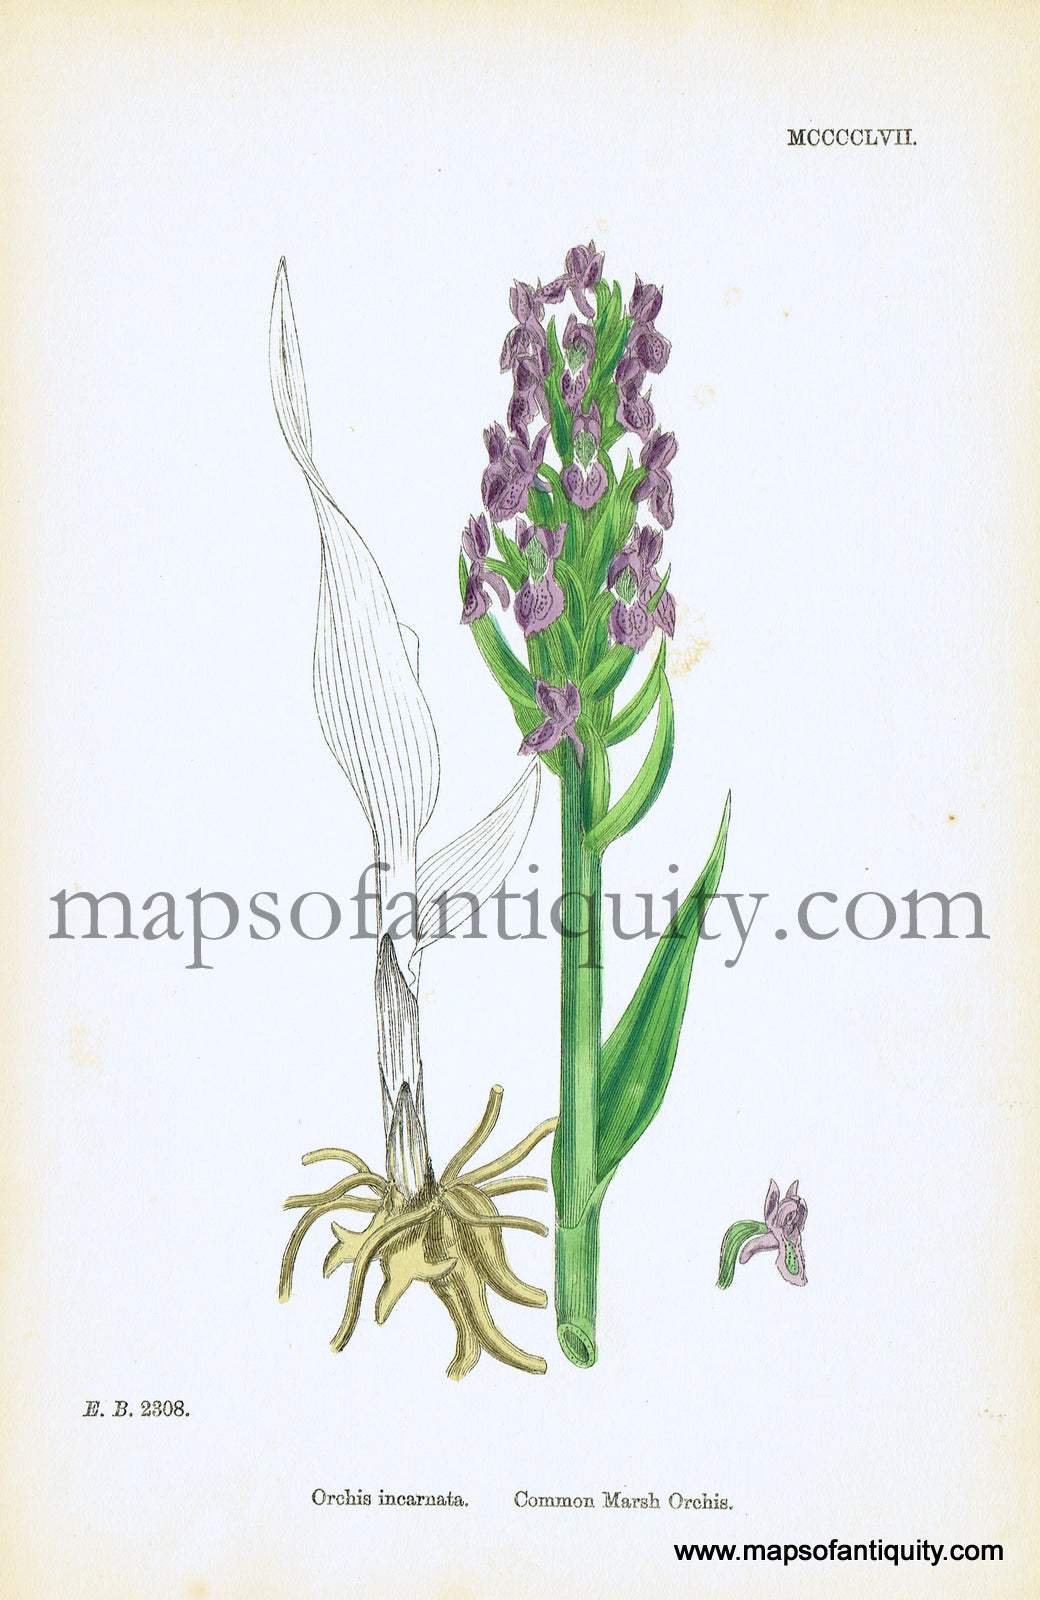 Antique-Hand-Colored-Print-Orchis-incarnata-Antique-Prints-Natural-History-Botanical-c.-1860-Sowerby-Maps-Of-Antiquity